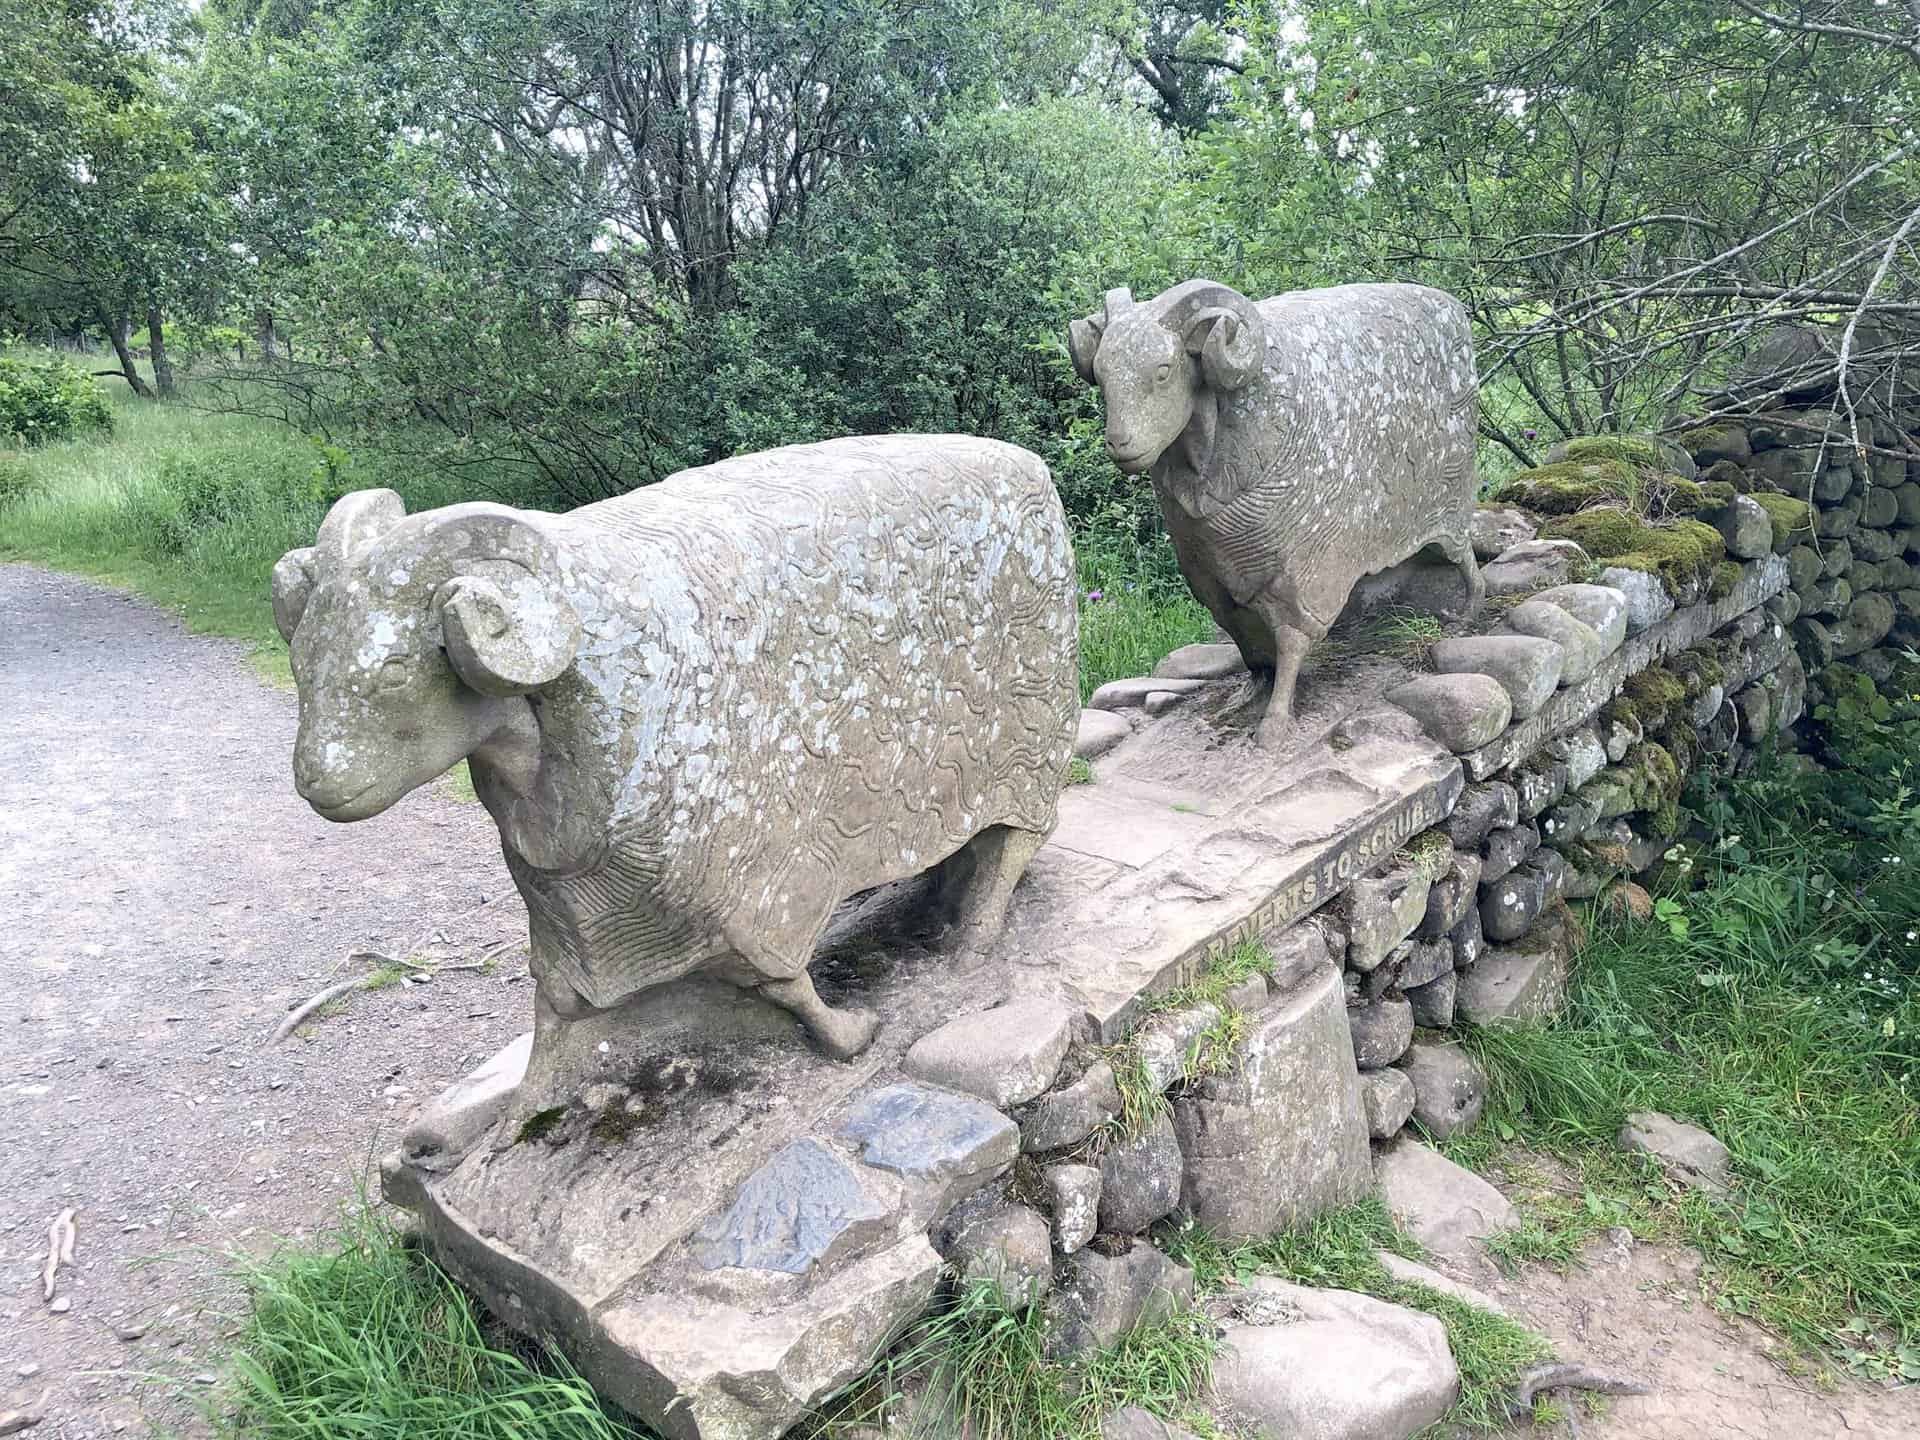 A charming pair of stone sheep near Wynch Bridge, symbolising the area's pastoral beauty. Cross the bridge to return to Bowlees, marking the end of your High Force waterfall walk.